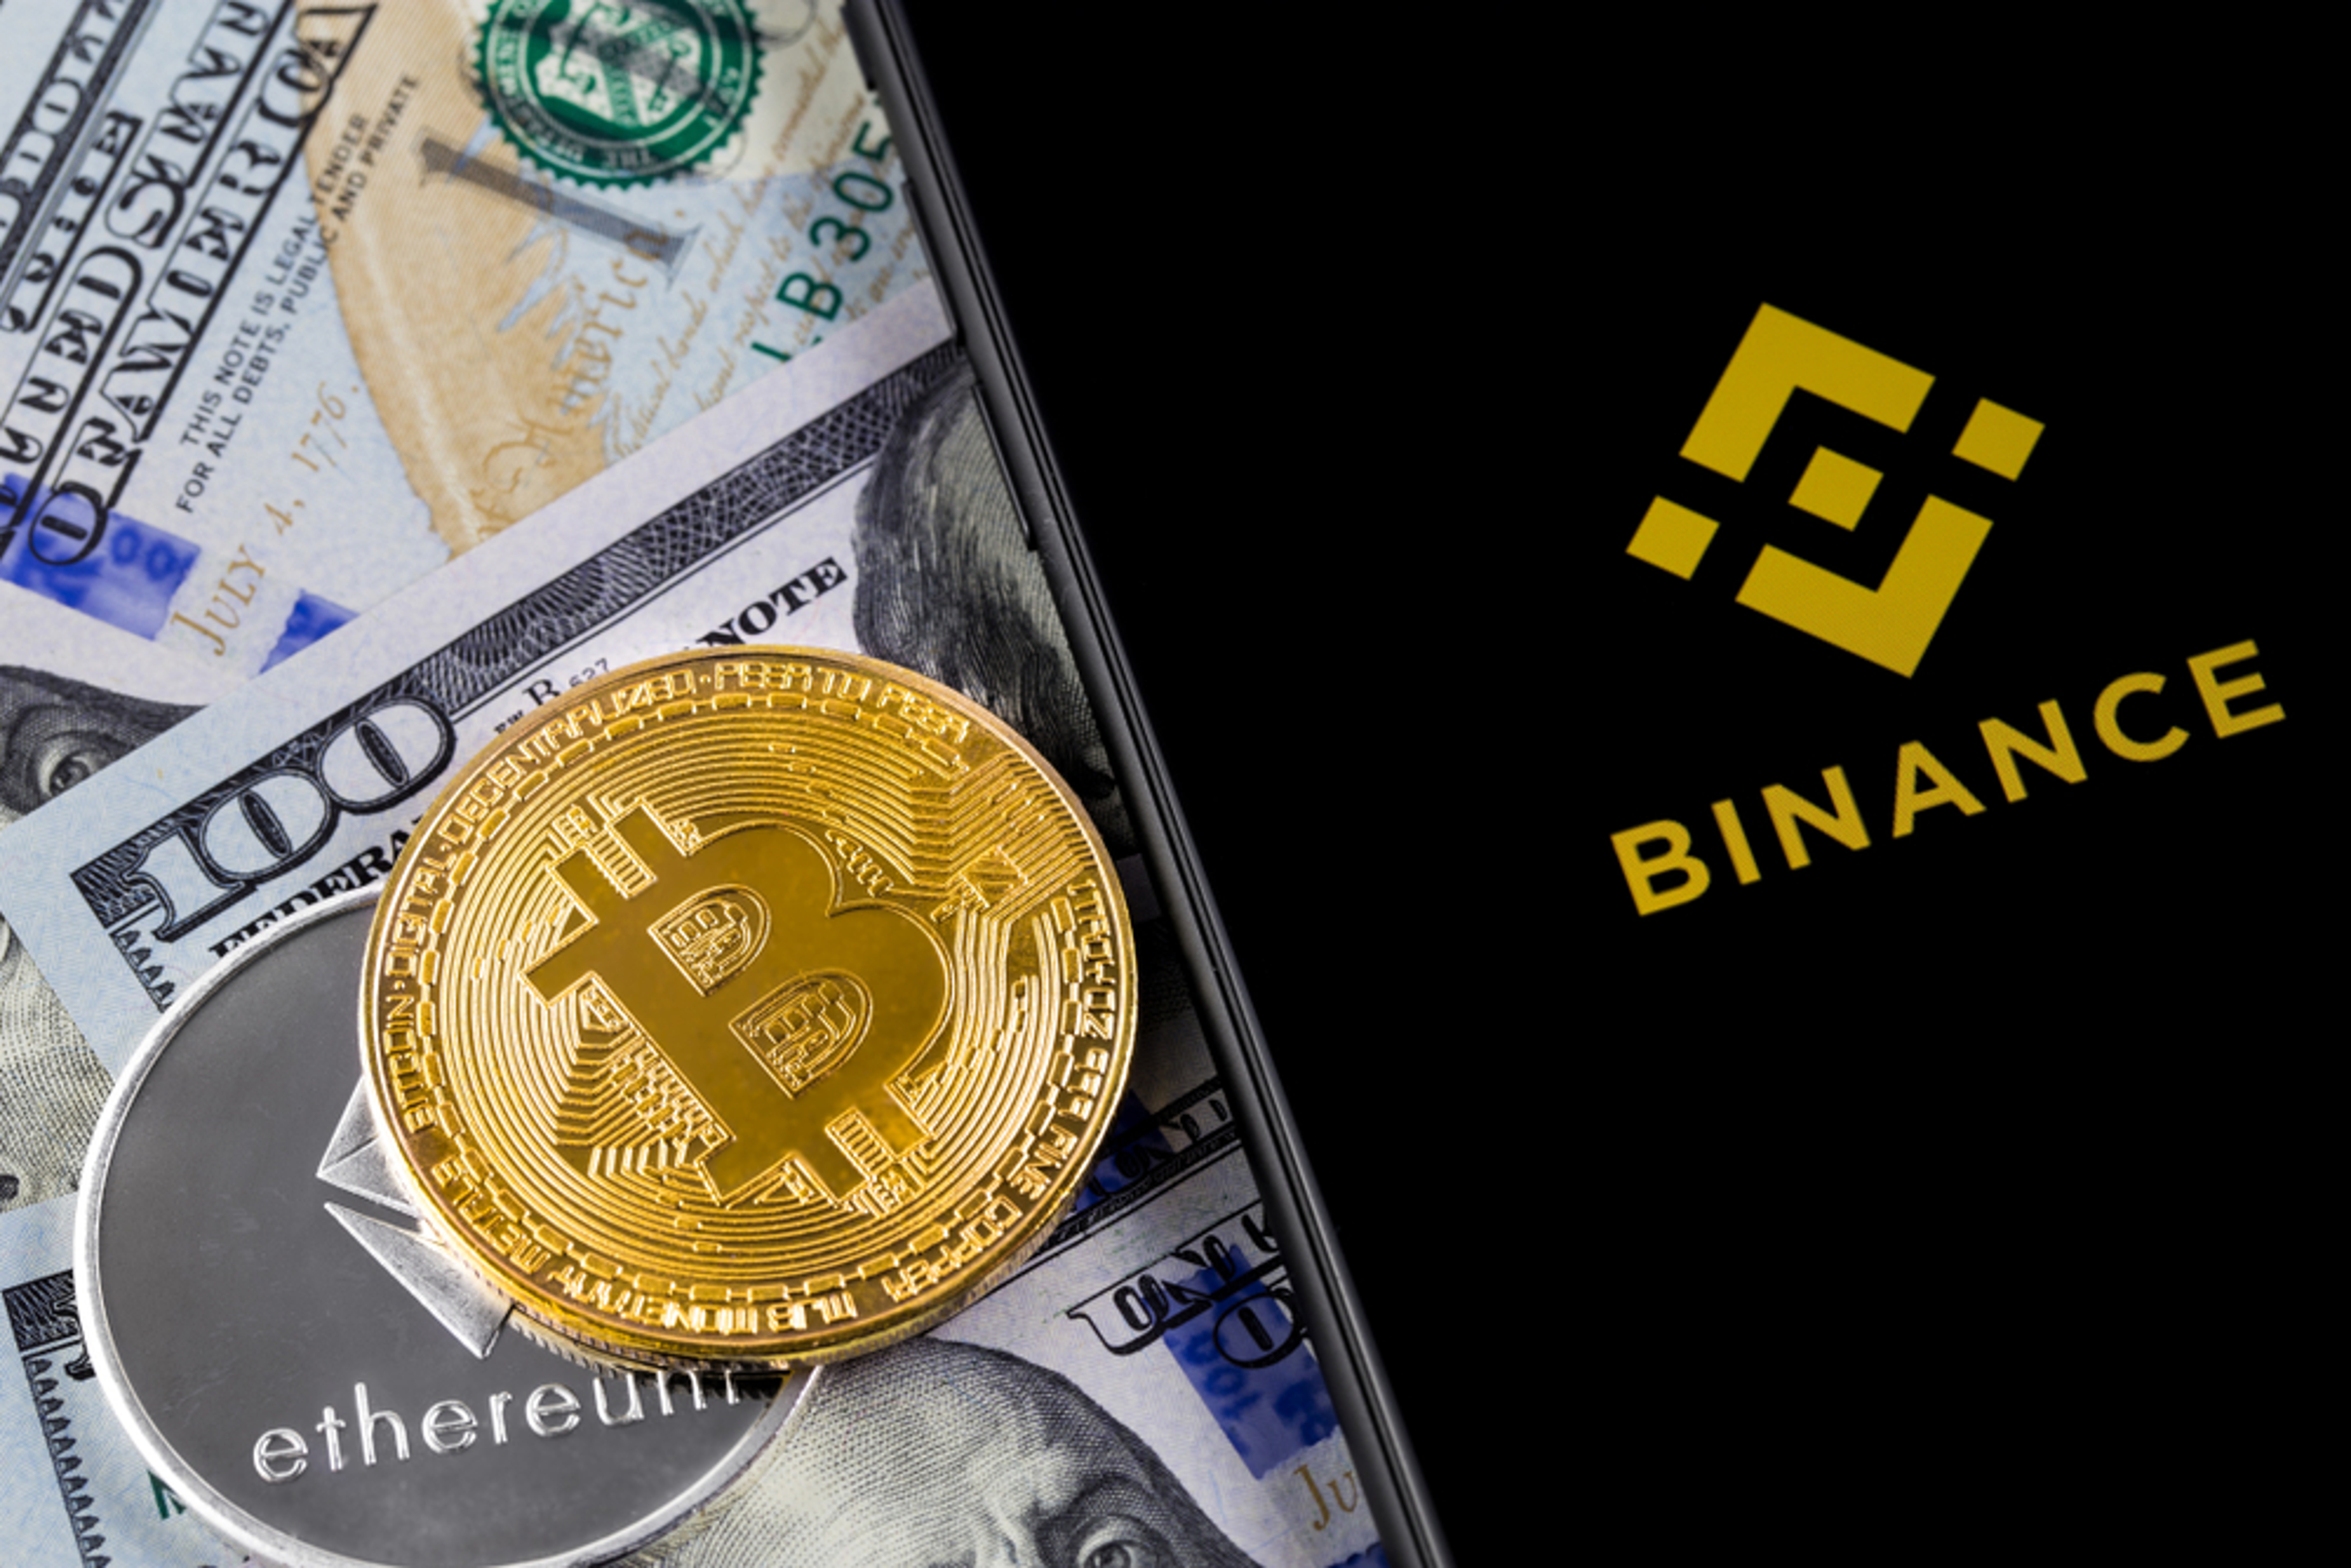 Binance&#39;s Ongoing &#39;Stress Test&#39; Sees $3B Outflow in 7 Days: Here&#39;s Everything That Happened So Far